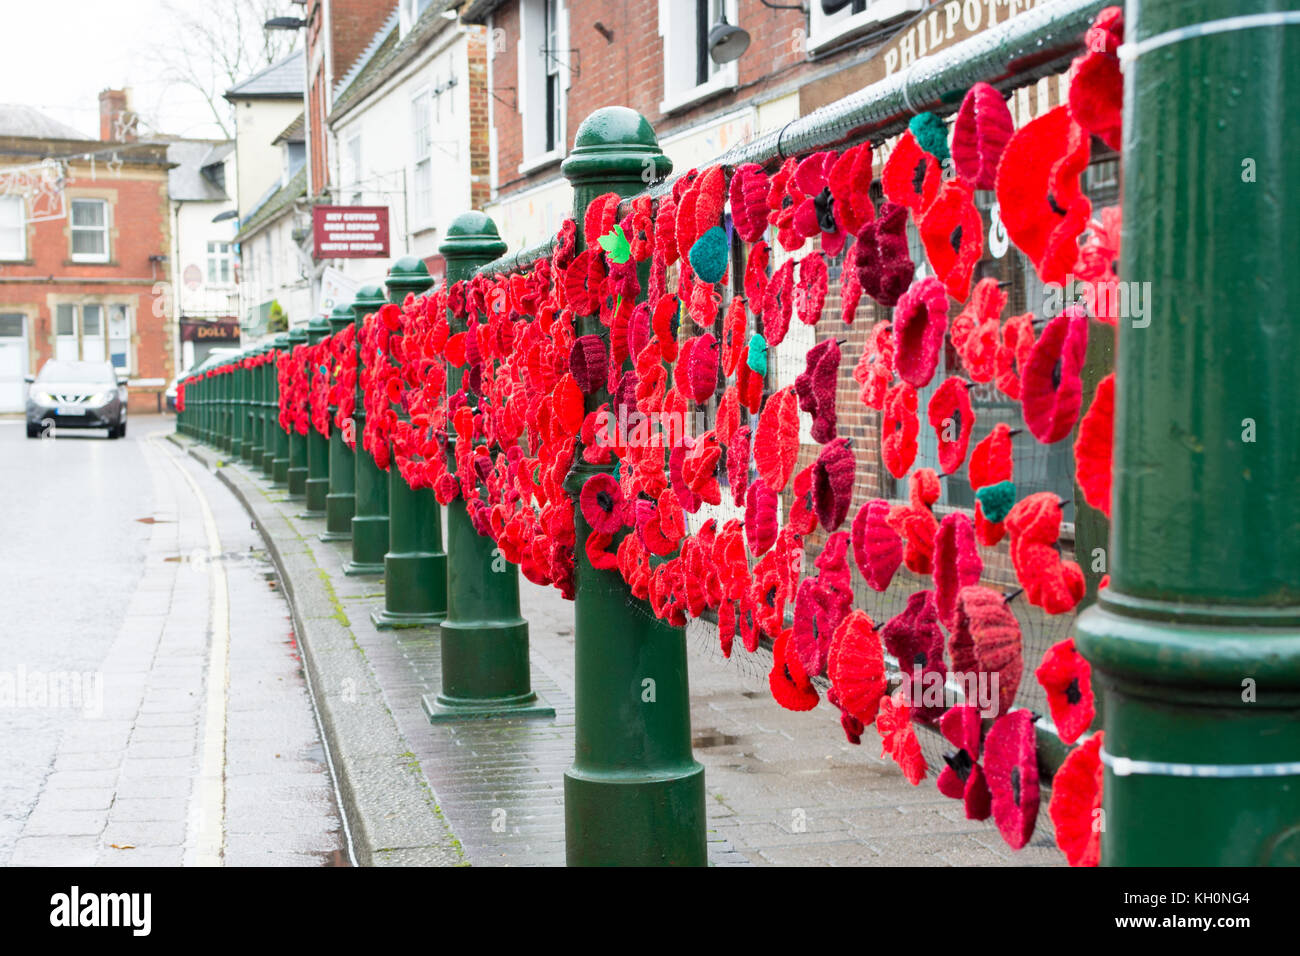 Two and a half thousand knitted red poppies decorating High Street railings for Armistice Day, Fordingbridge, Hampshire, UK, 11th November 2017. Stock Photo